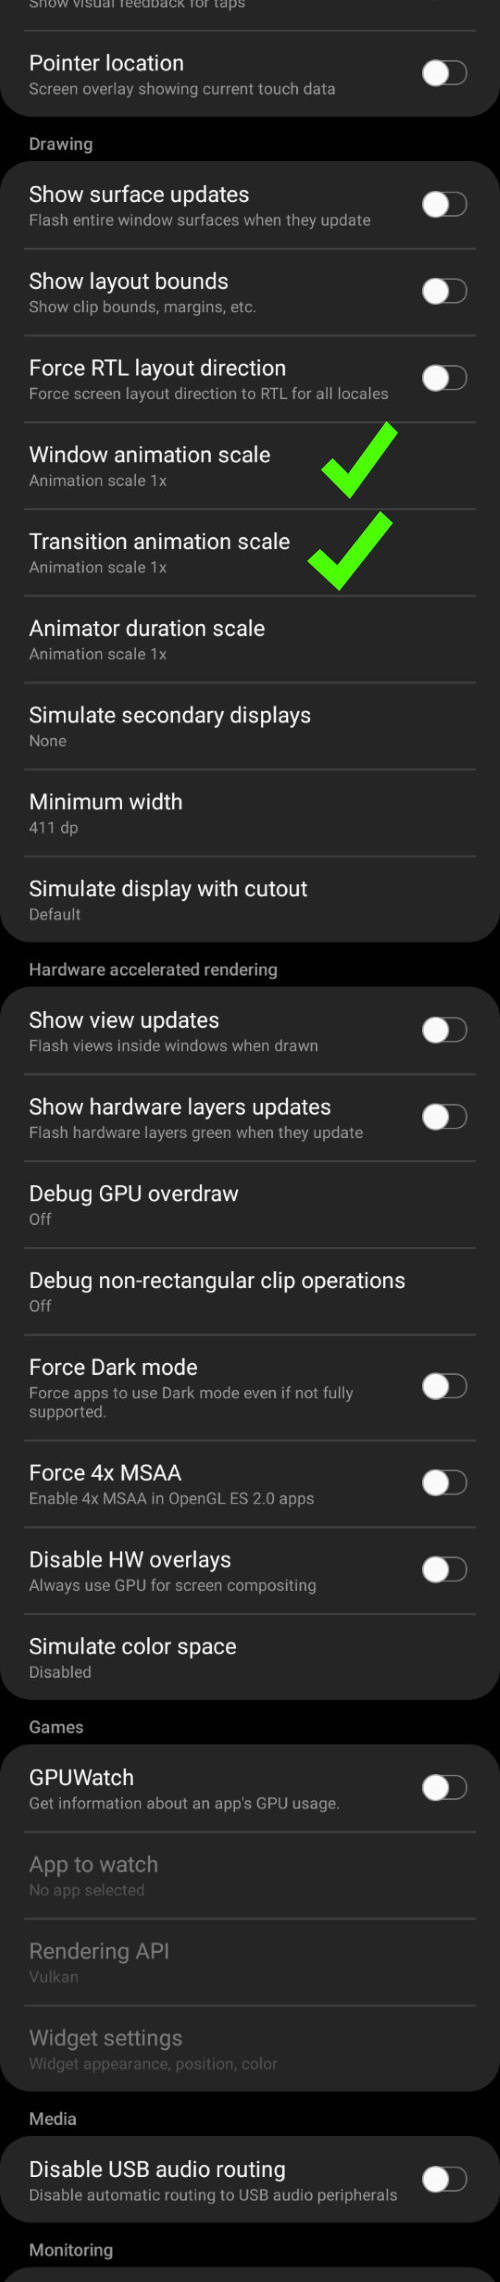 complete list of Galaxy S20 developer options (Android 10) part 3/4